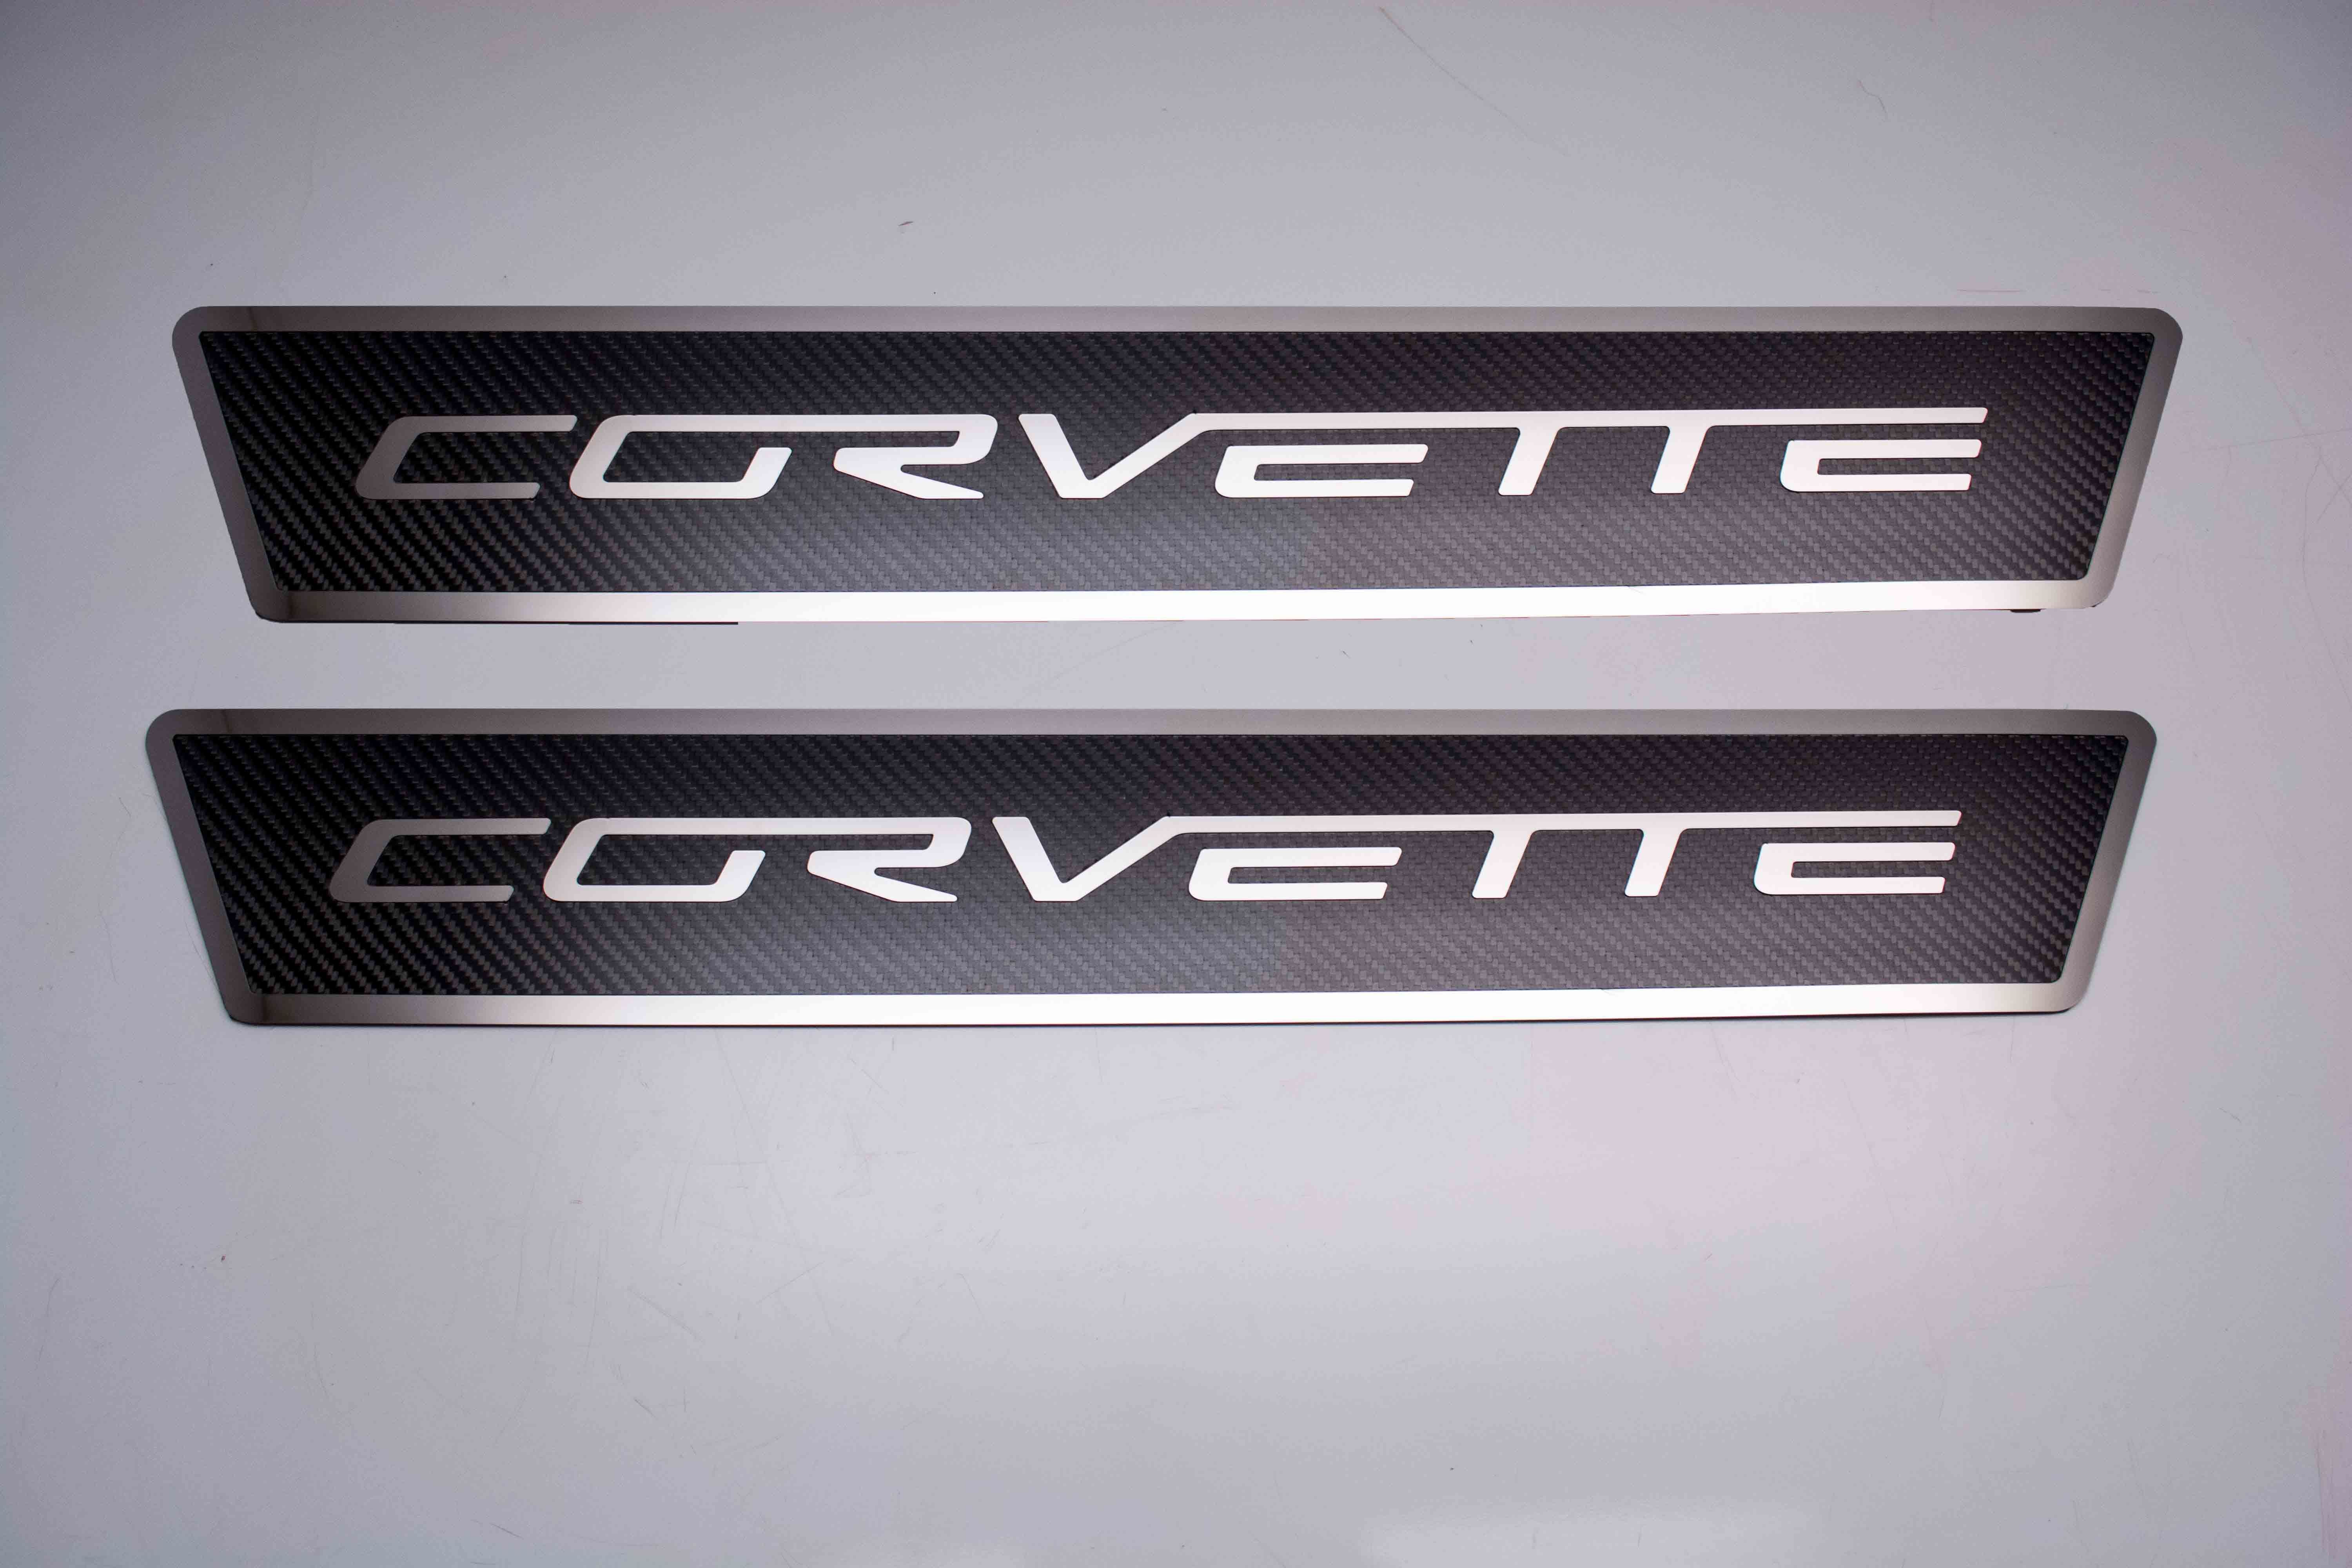 2005-2013 C6 Corvette, Outer Door sills Carbon Fiber w/ Polished Stainless Steel Inlay "Corvette", Stainless Steel